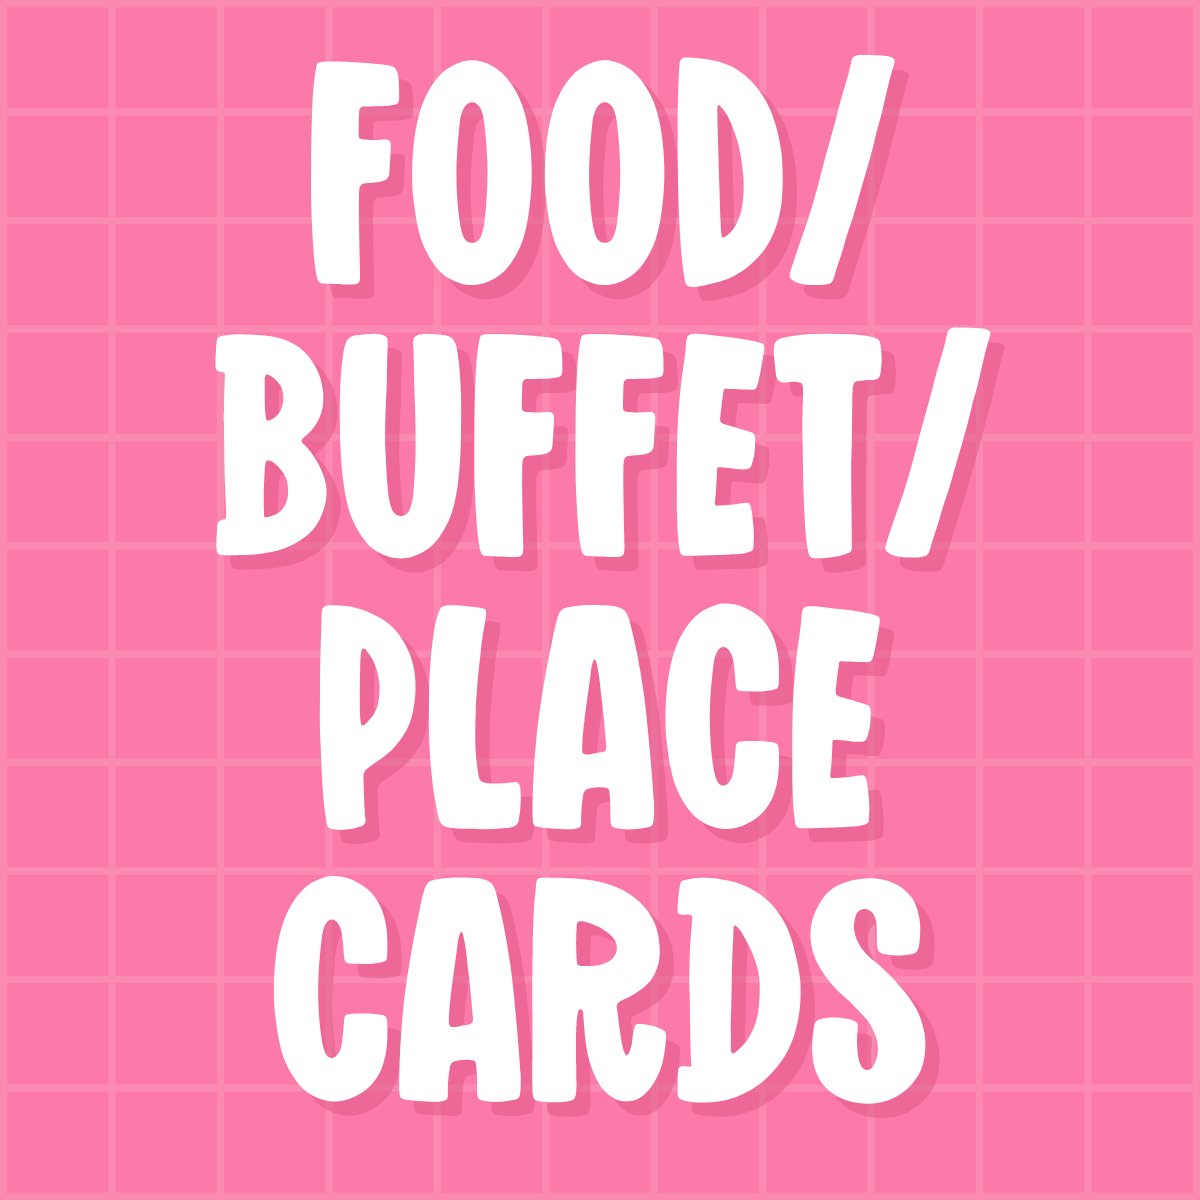 FOOD/ BUFFET/PLACE CARDS